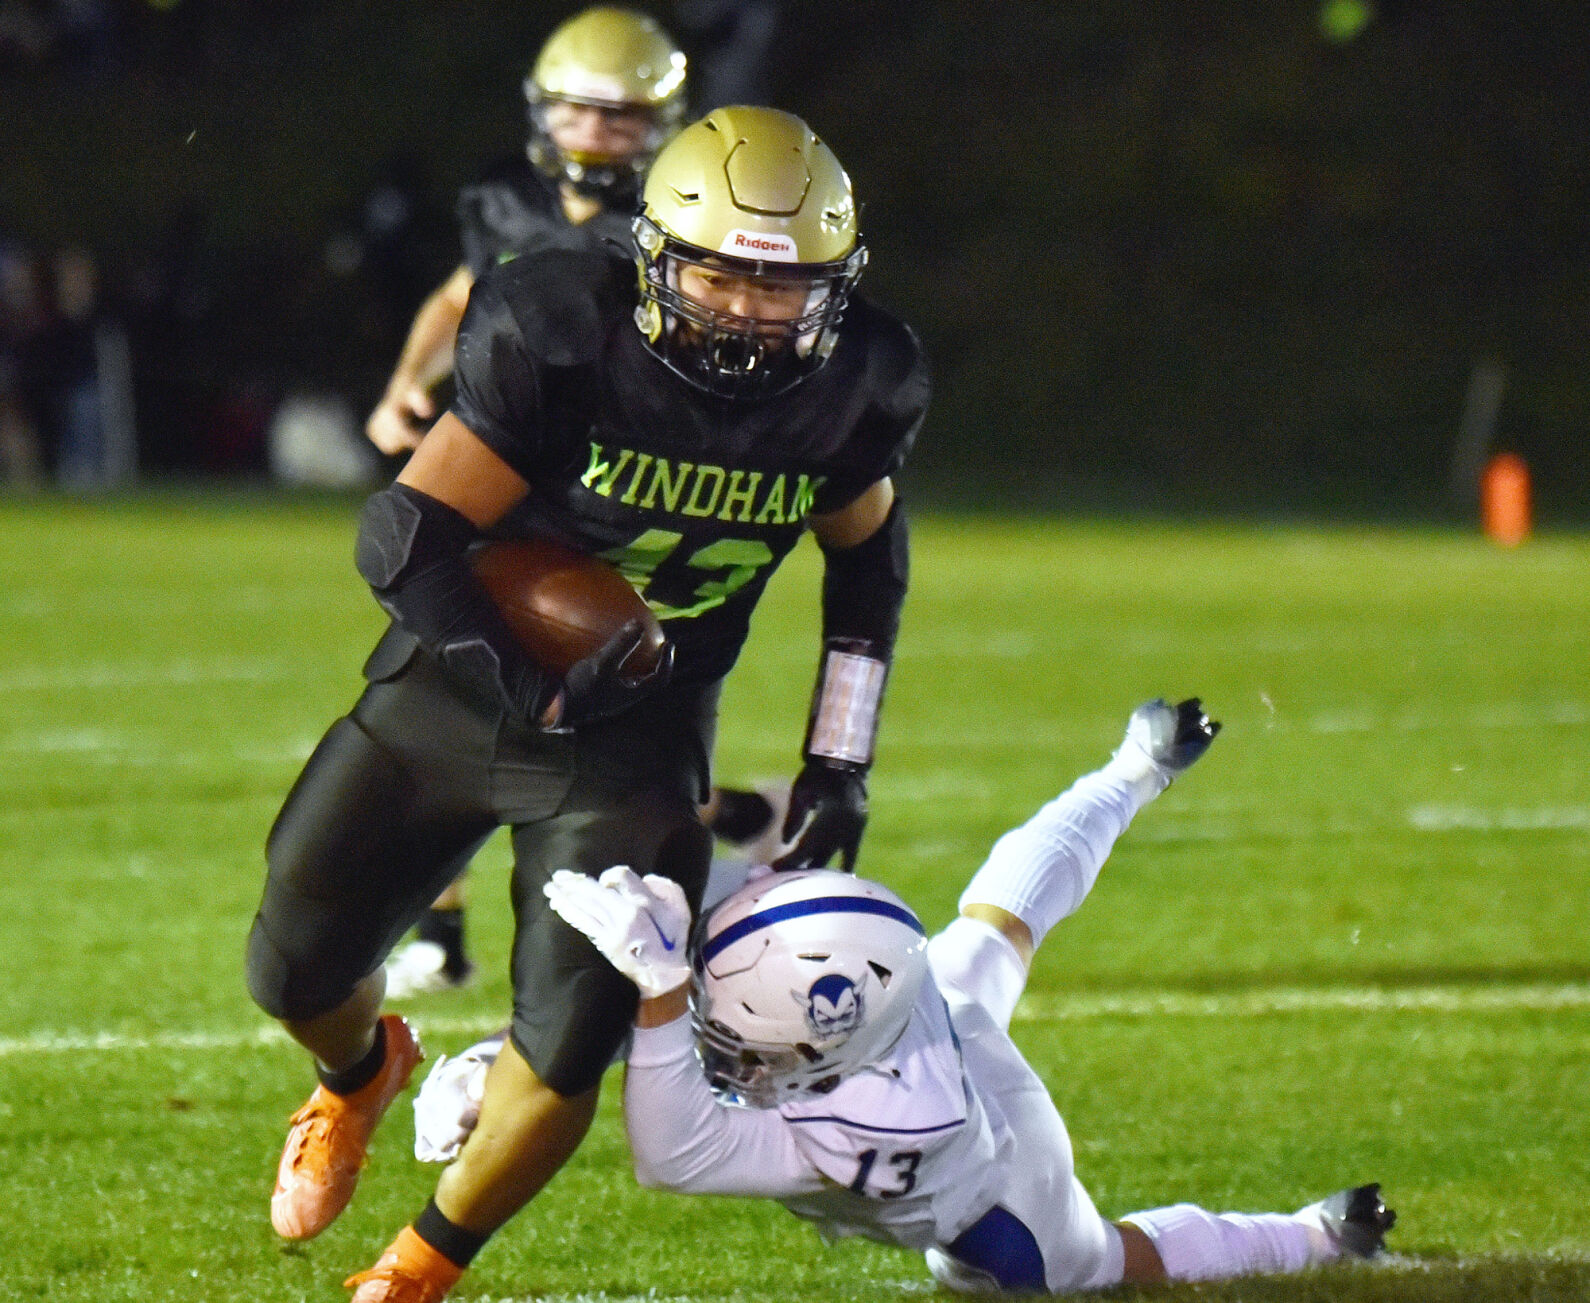 Windham High football team finds success in stormy game against Manchester Central